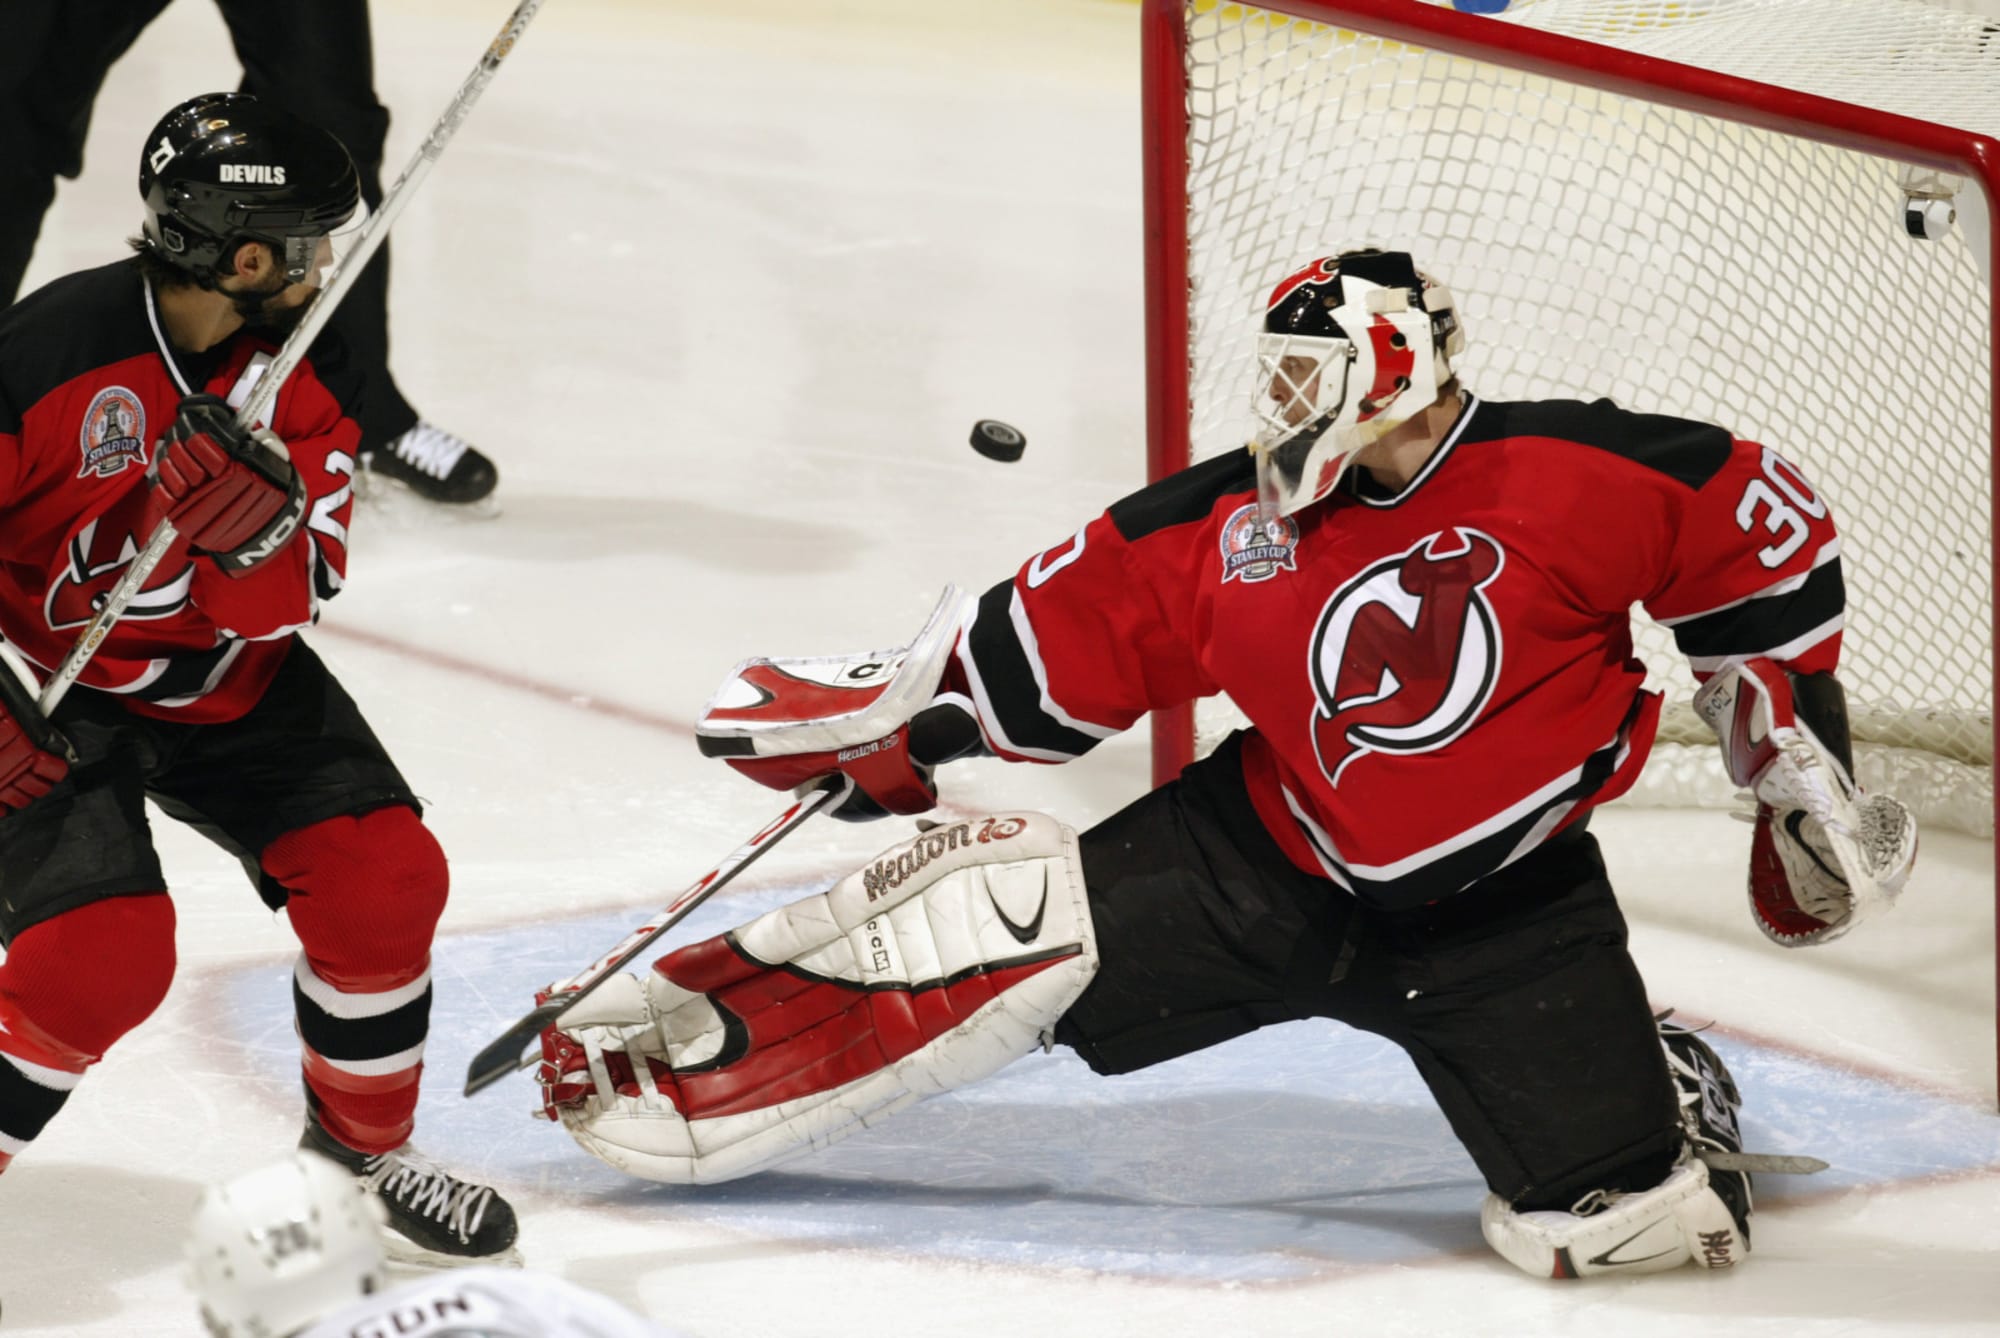 New Jersey Devils goalie Martin Brodeur about to take ice before game  News Photo - Getty Images